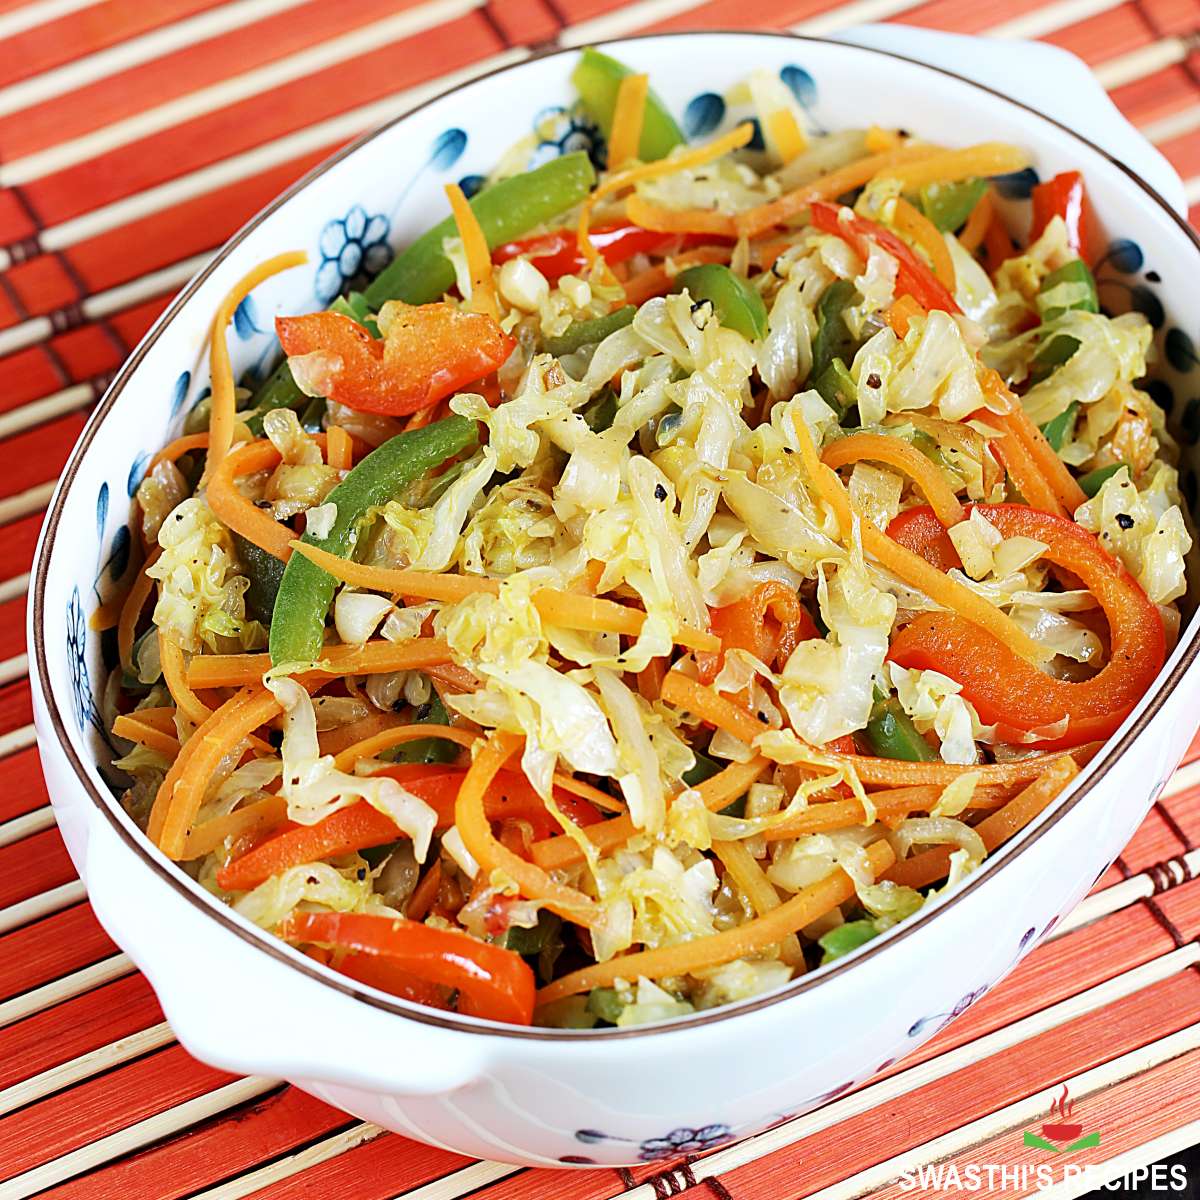 Cabbage Stir Fry Recipe made in Chinese Style